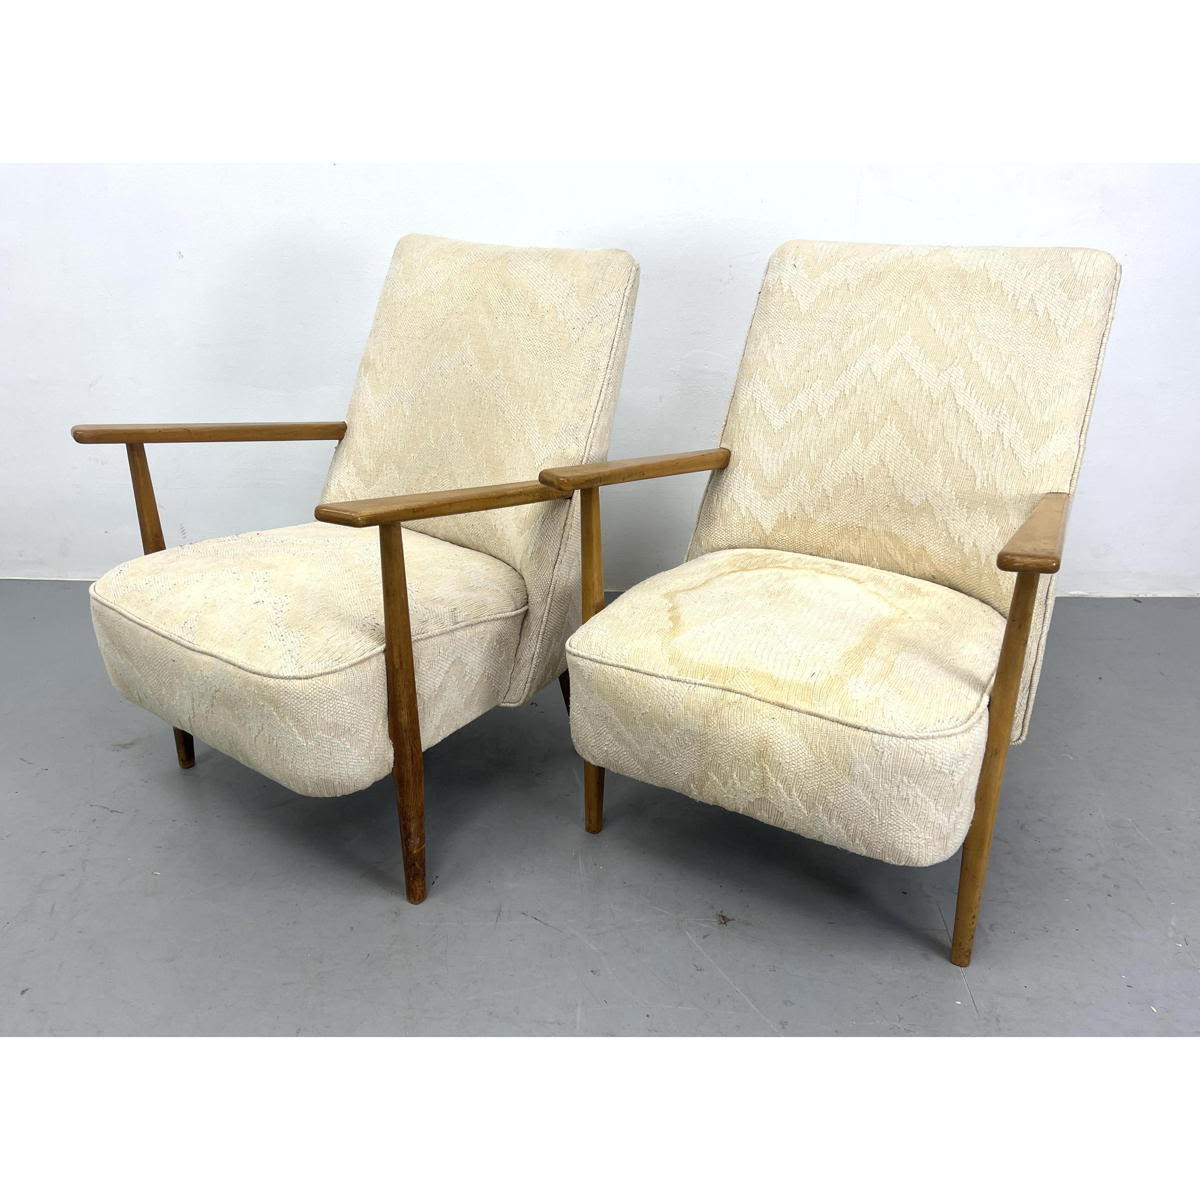 Pr Modernist Lounge Chairs Open 2ff8ad